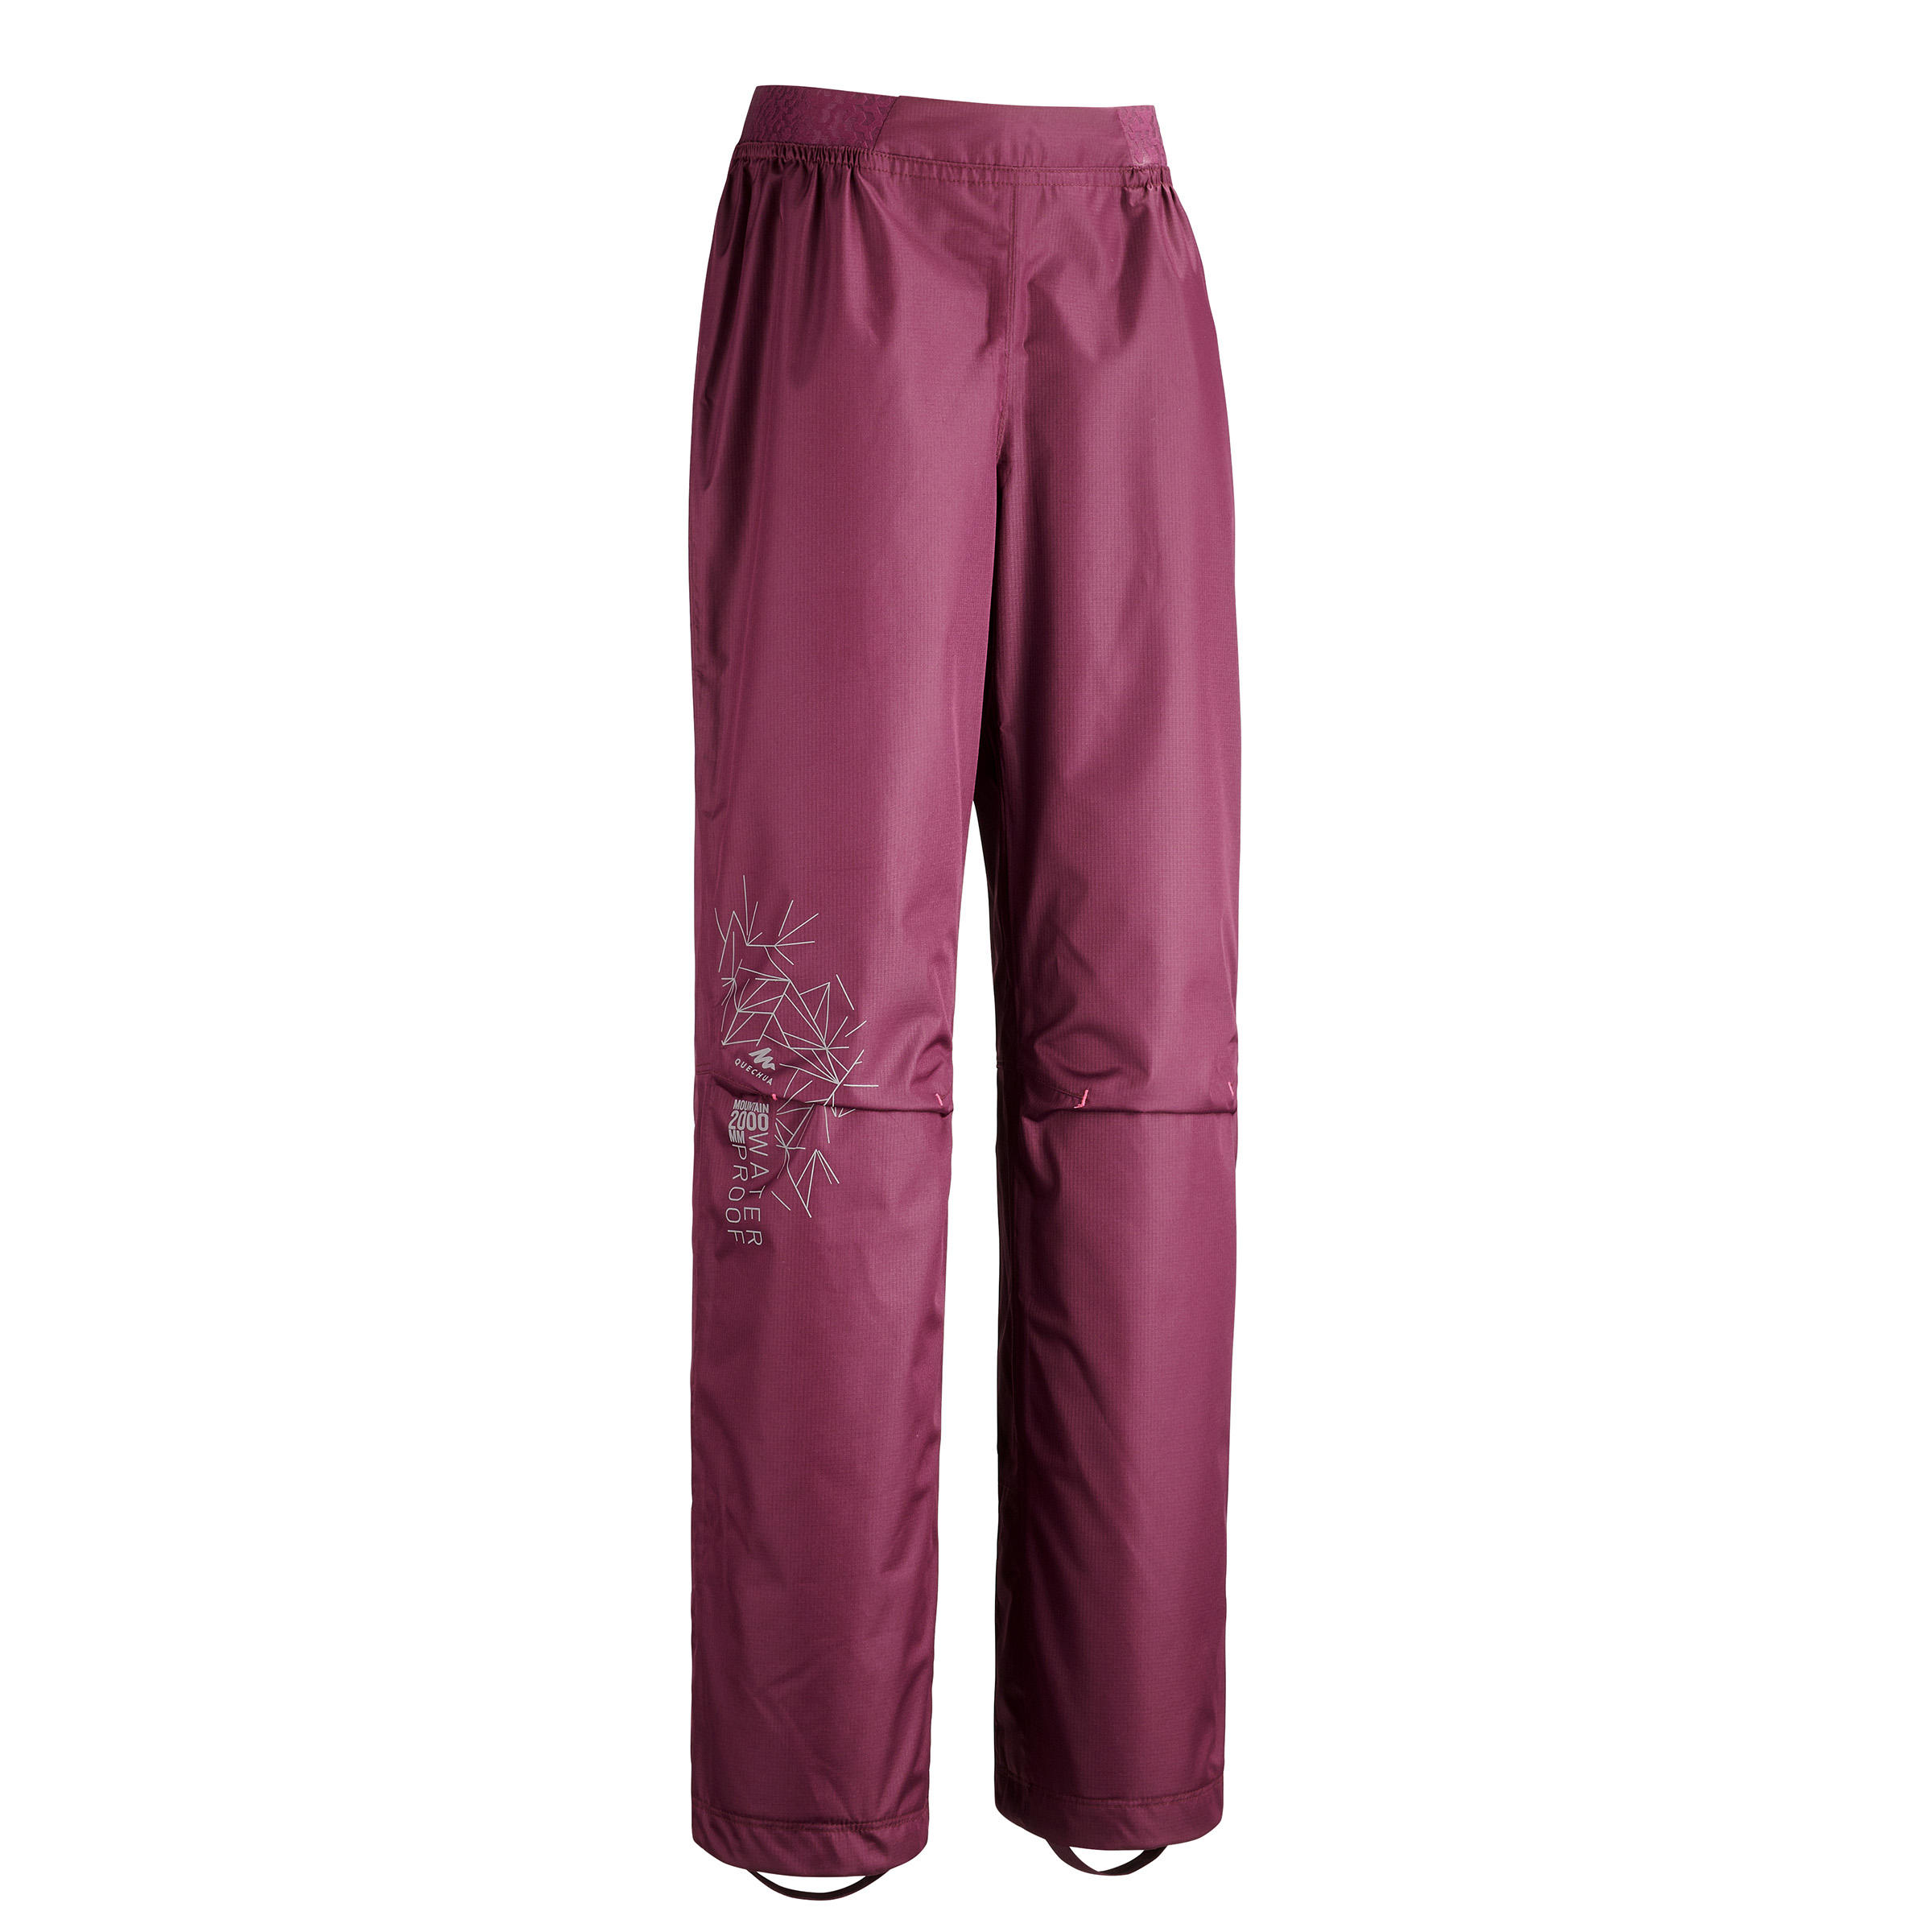 QUECHUA MH500 Kids' Hiking Overtrousers - Plum